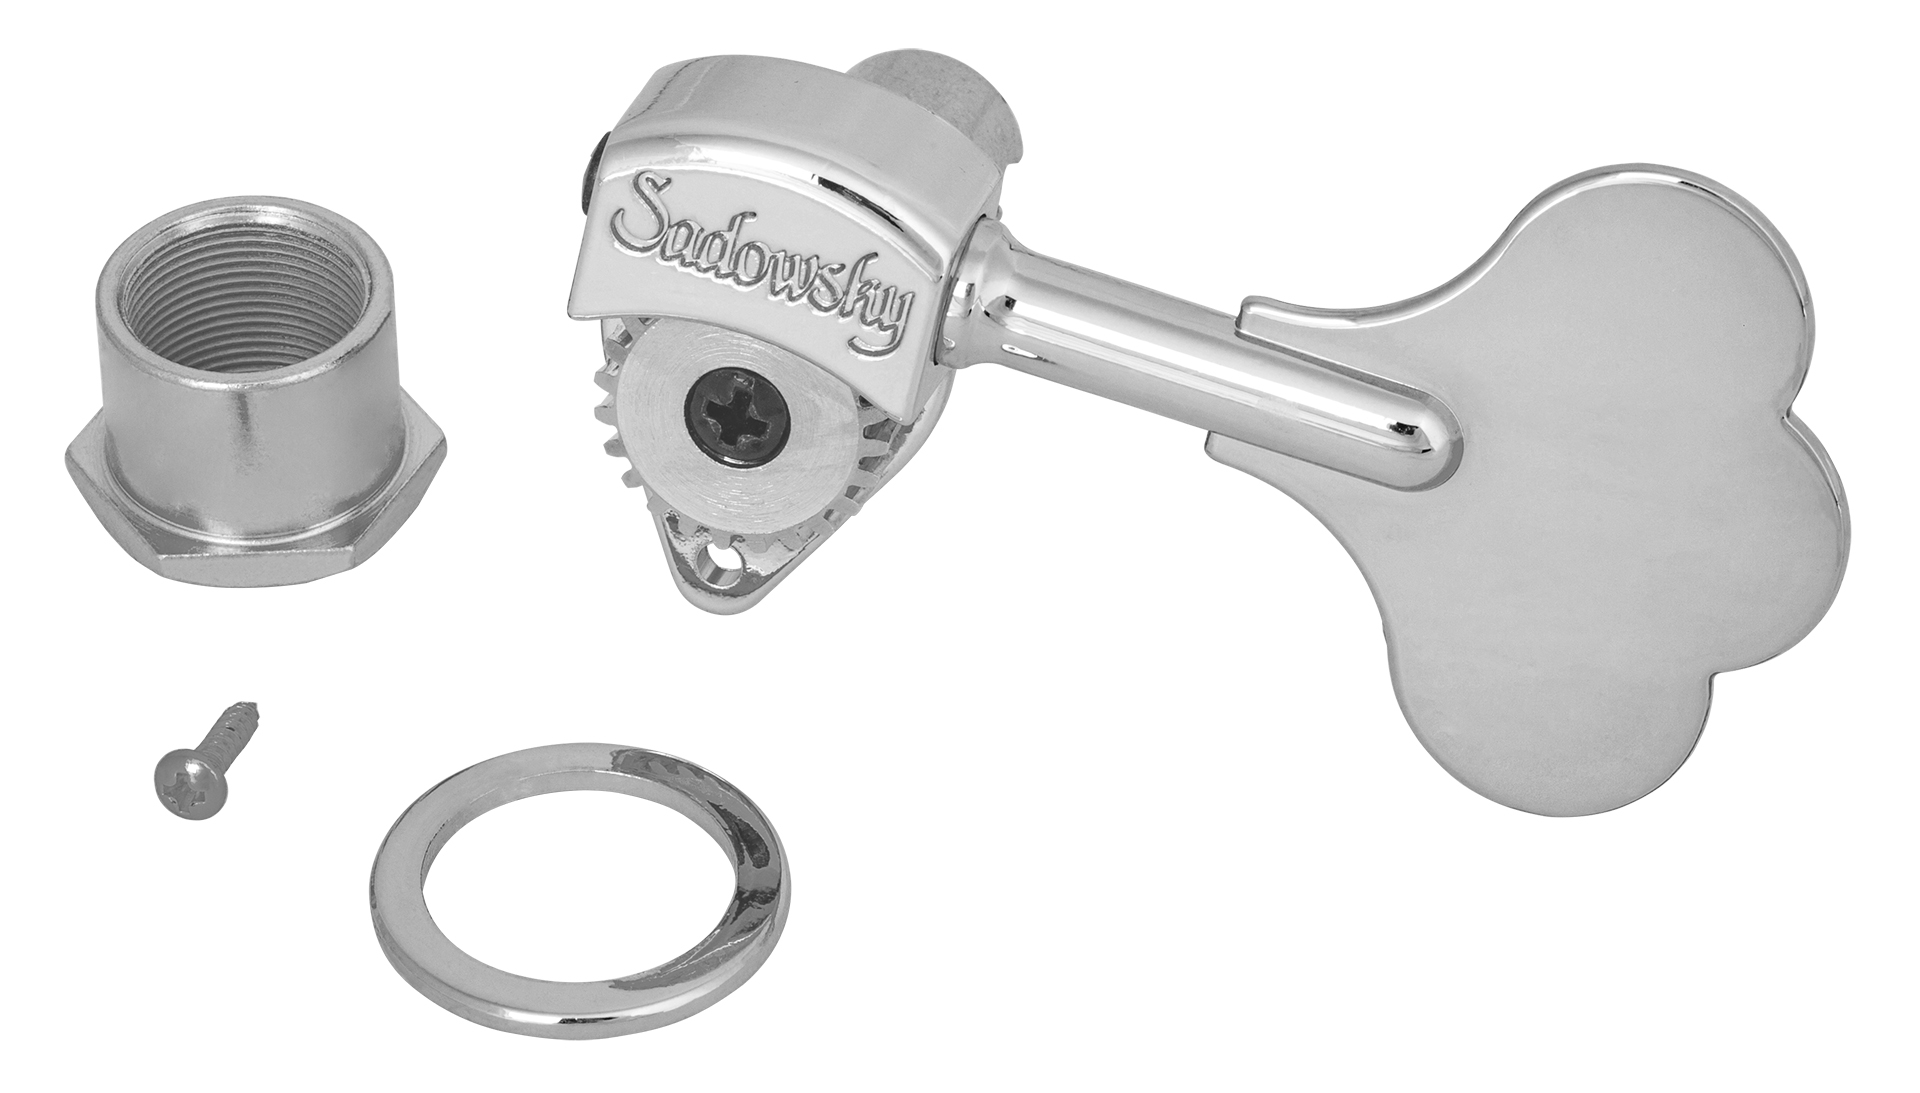 Sadowsky Parts - Light Machinehead with Open Gear - Chrome - Left (Bass) Side